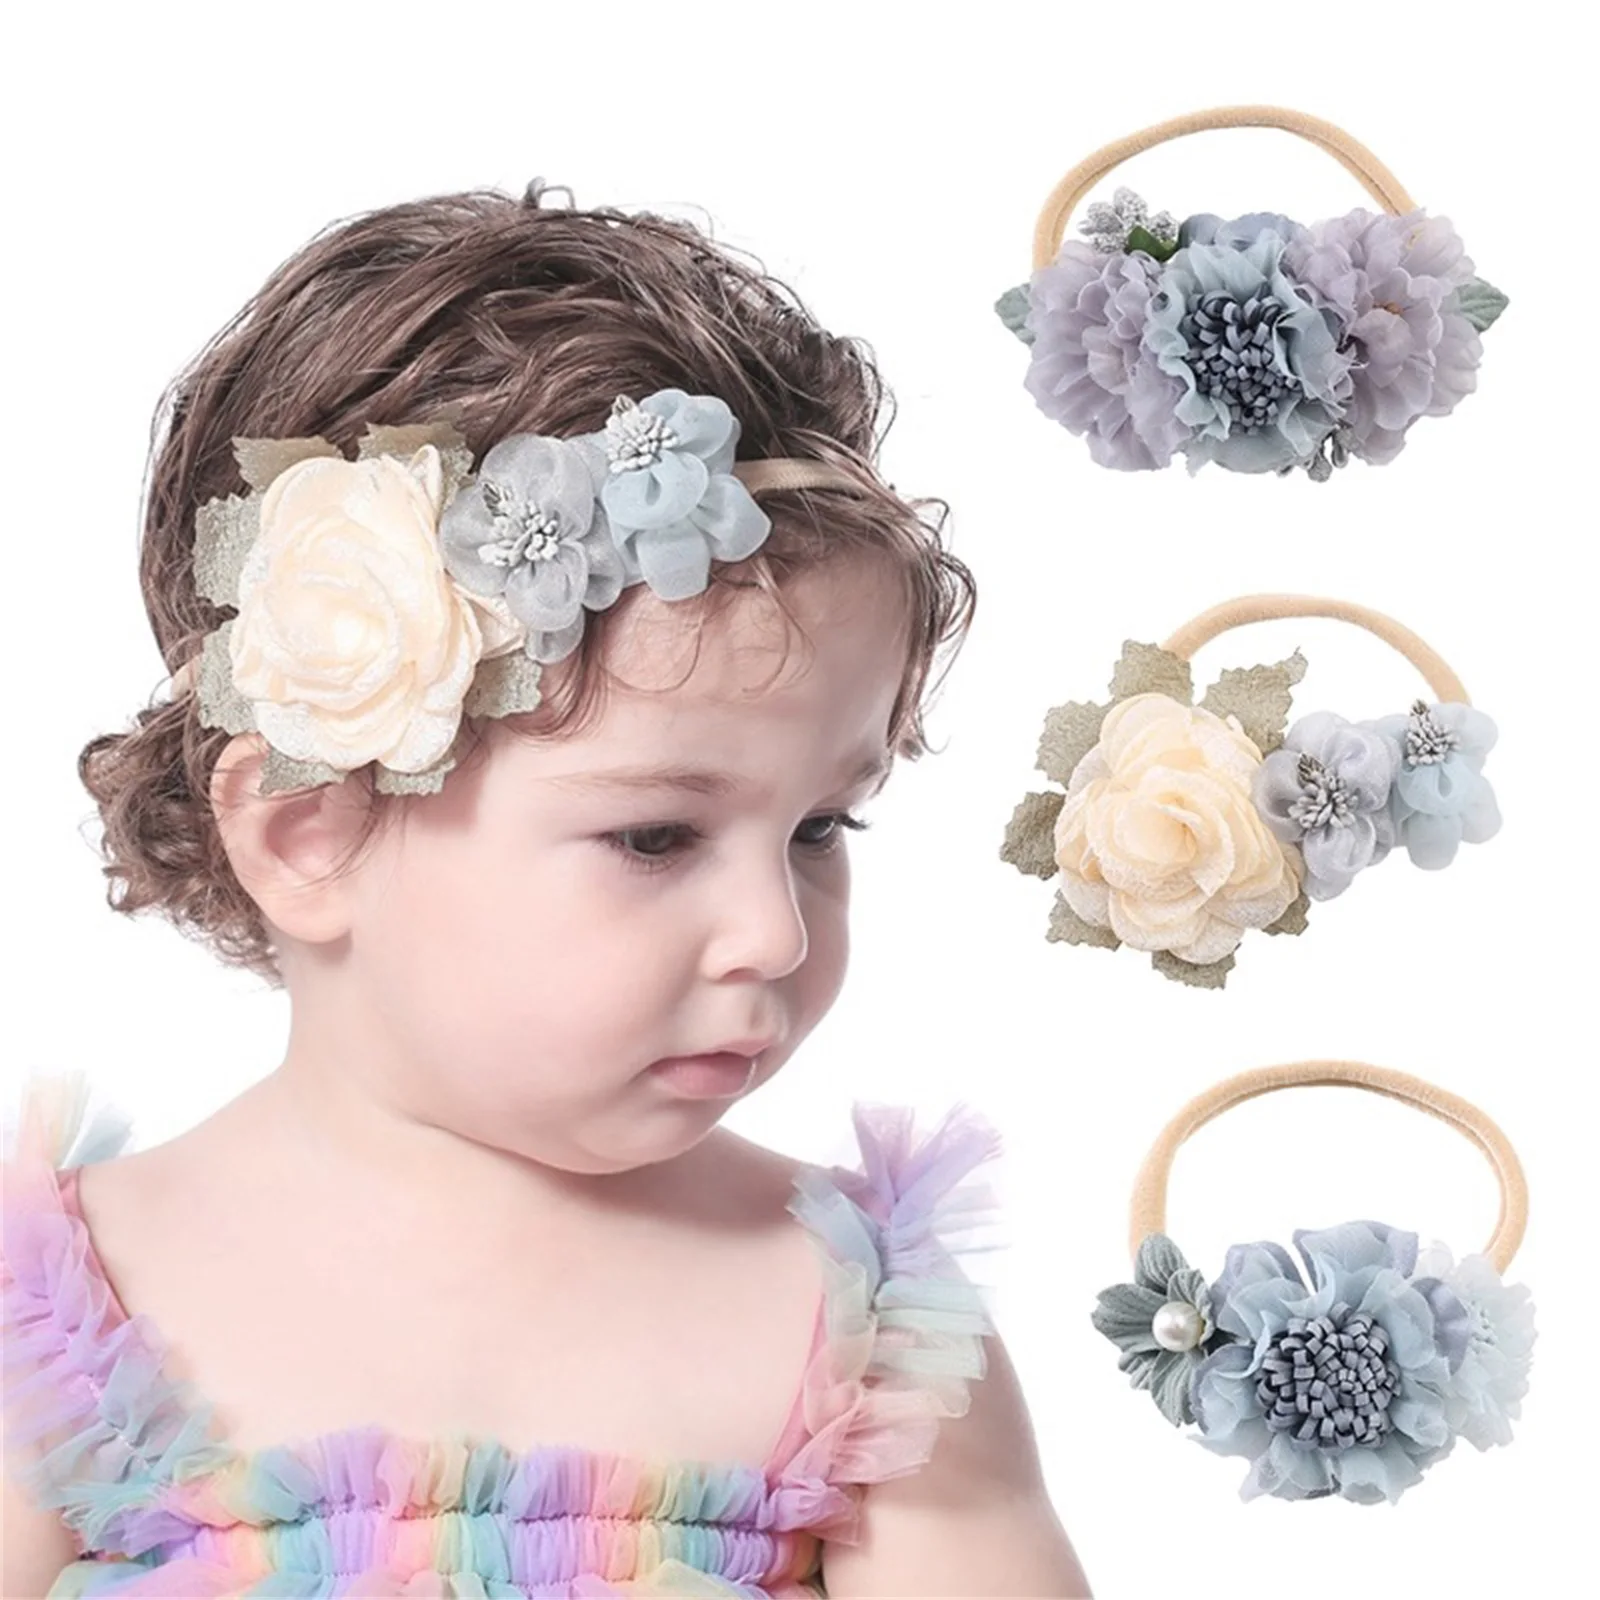 EWODOS Toddler Newborn Baby Girls Nylon Headbands Soft Infant Flower Hairbands Hair Bows Accessories for Home Party Wedding 10pcs high quality kraft paper pouches gift bag with nylon thread handle fashionable party clothes shoes gift shopping bags